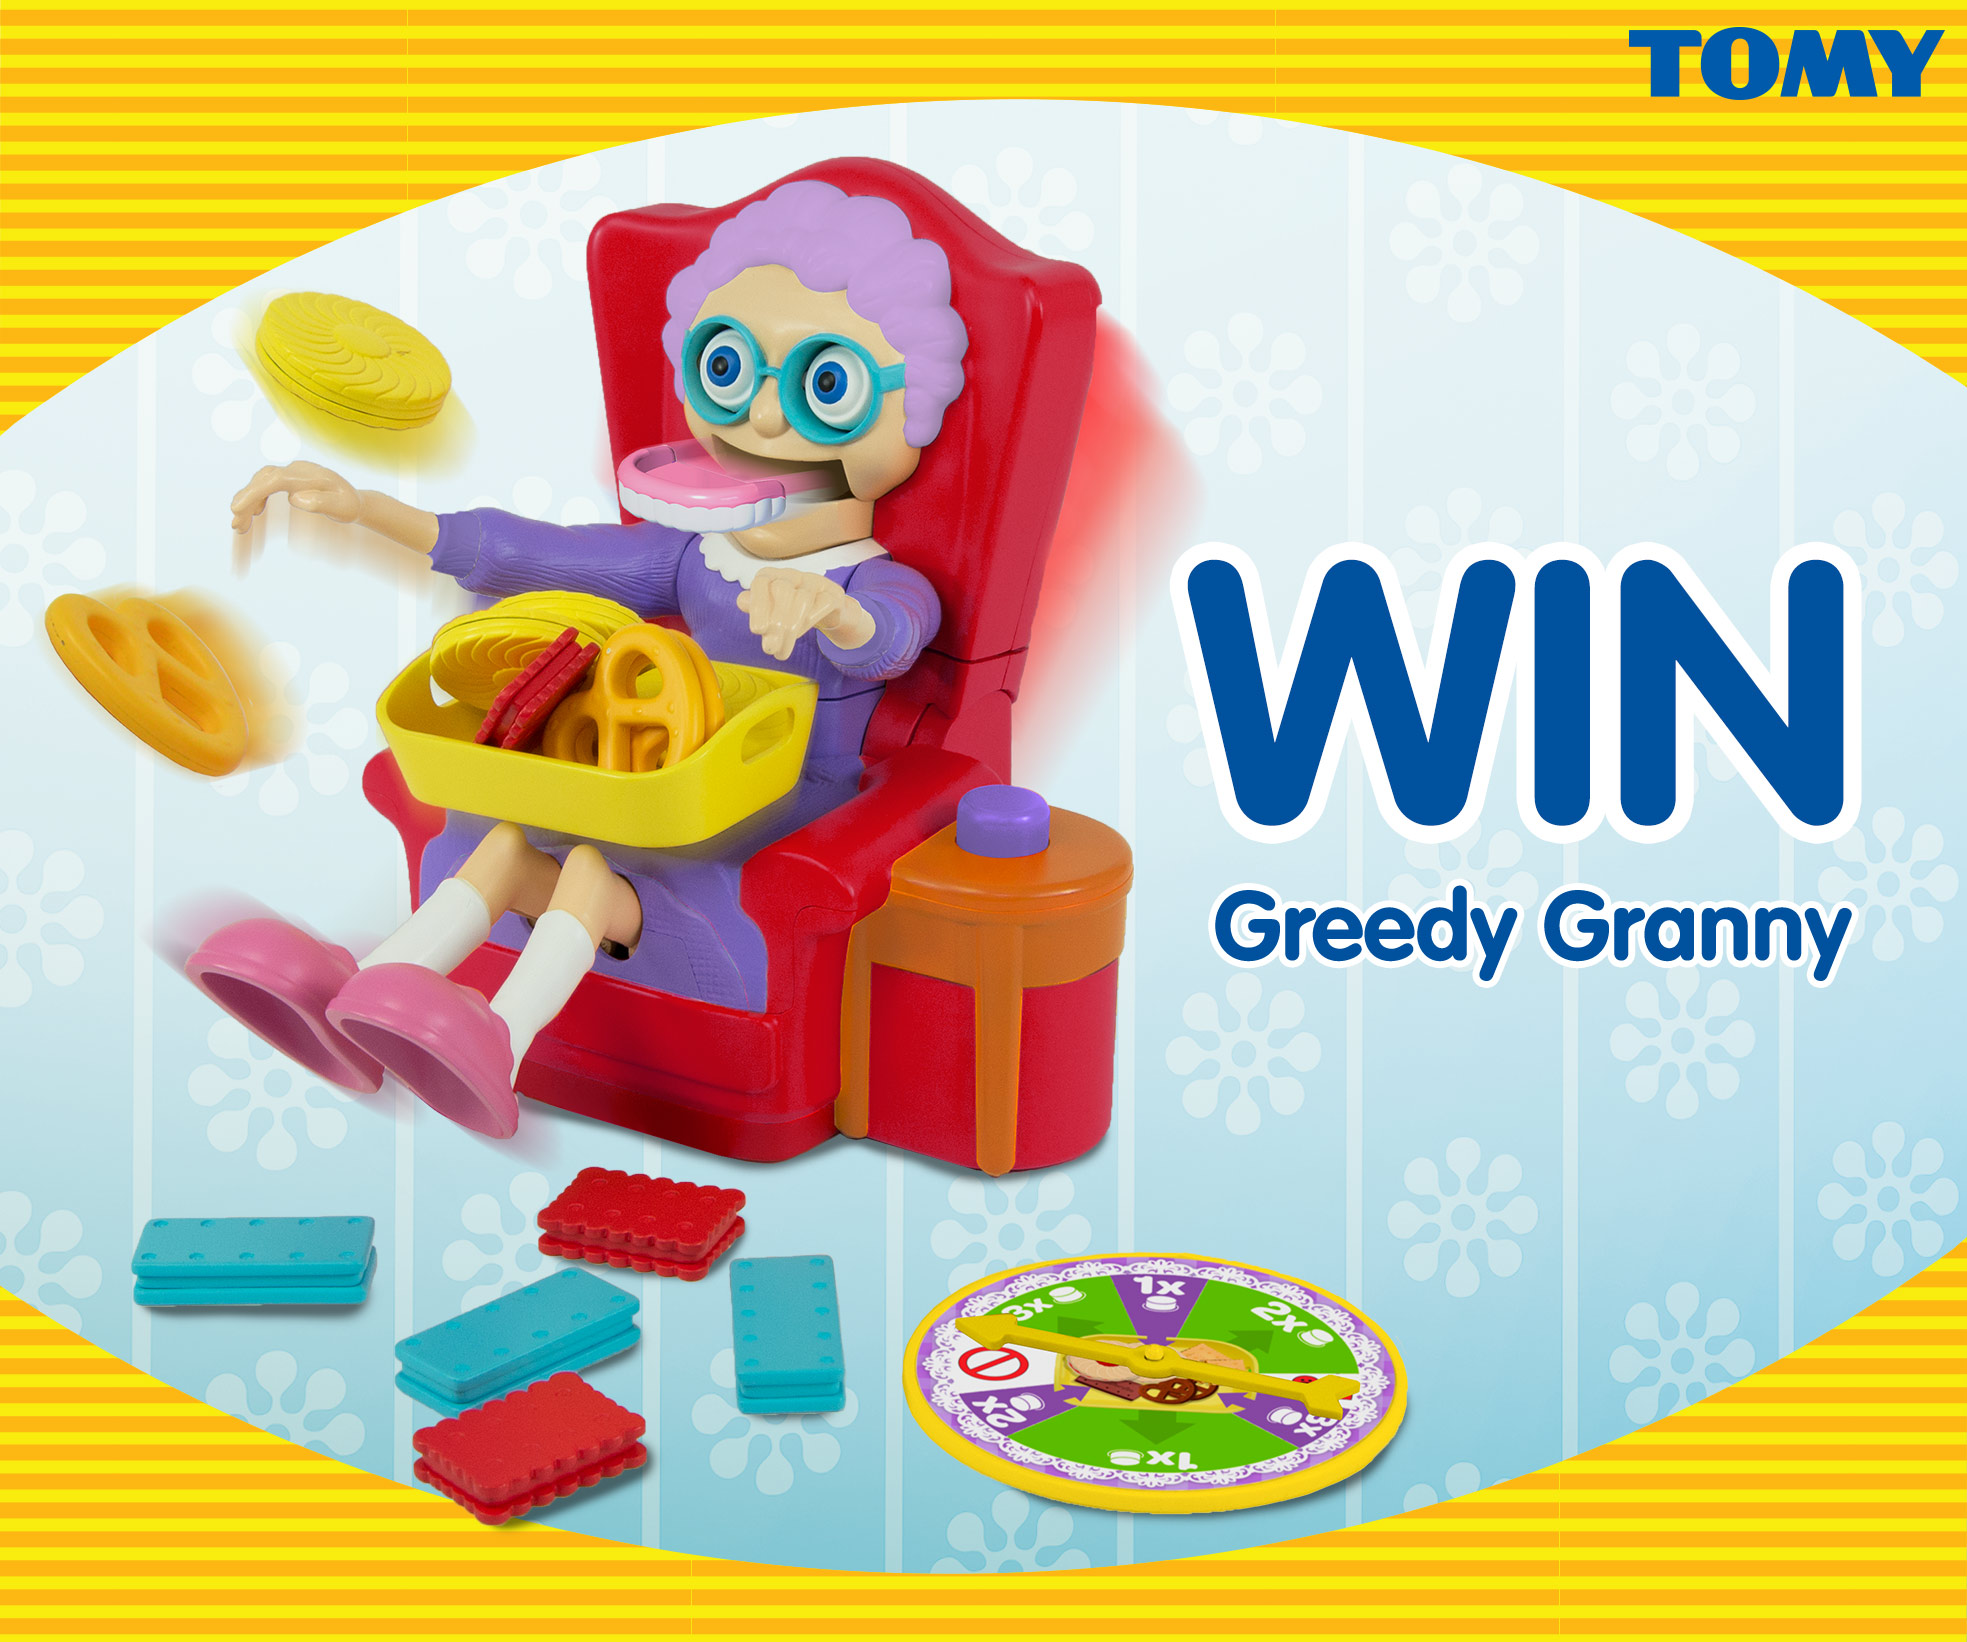 Competition: Win 1 of 3 Greedy Granny games – Mummy and the Cuties